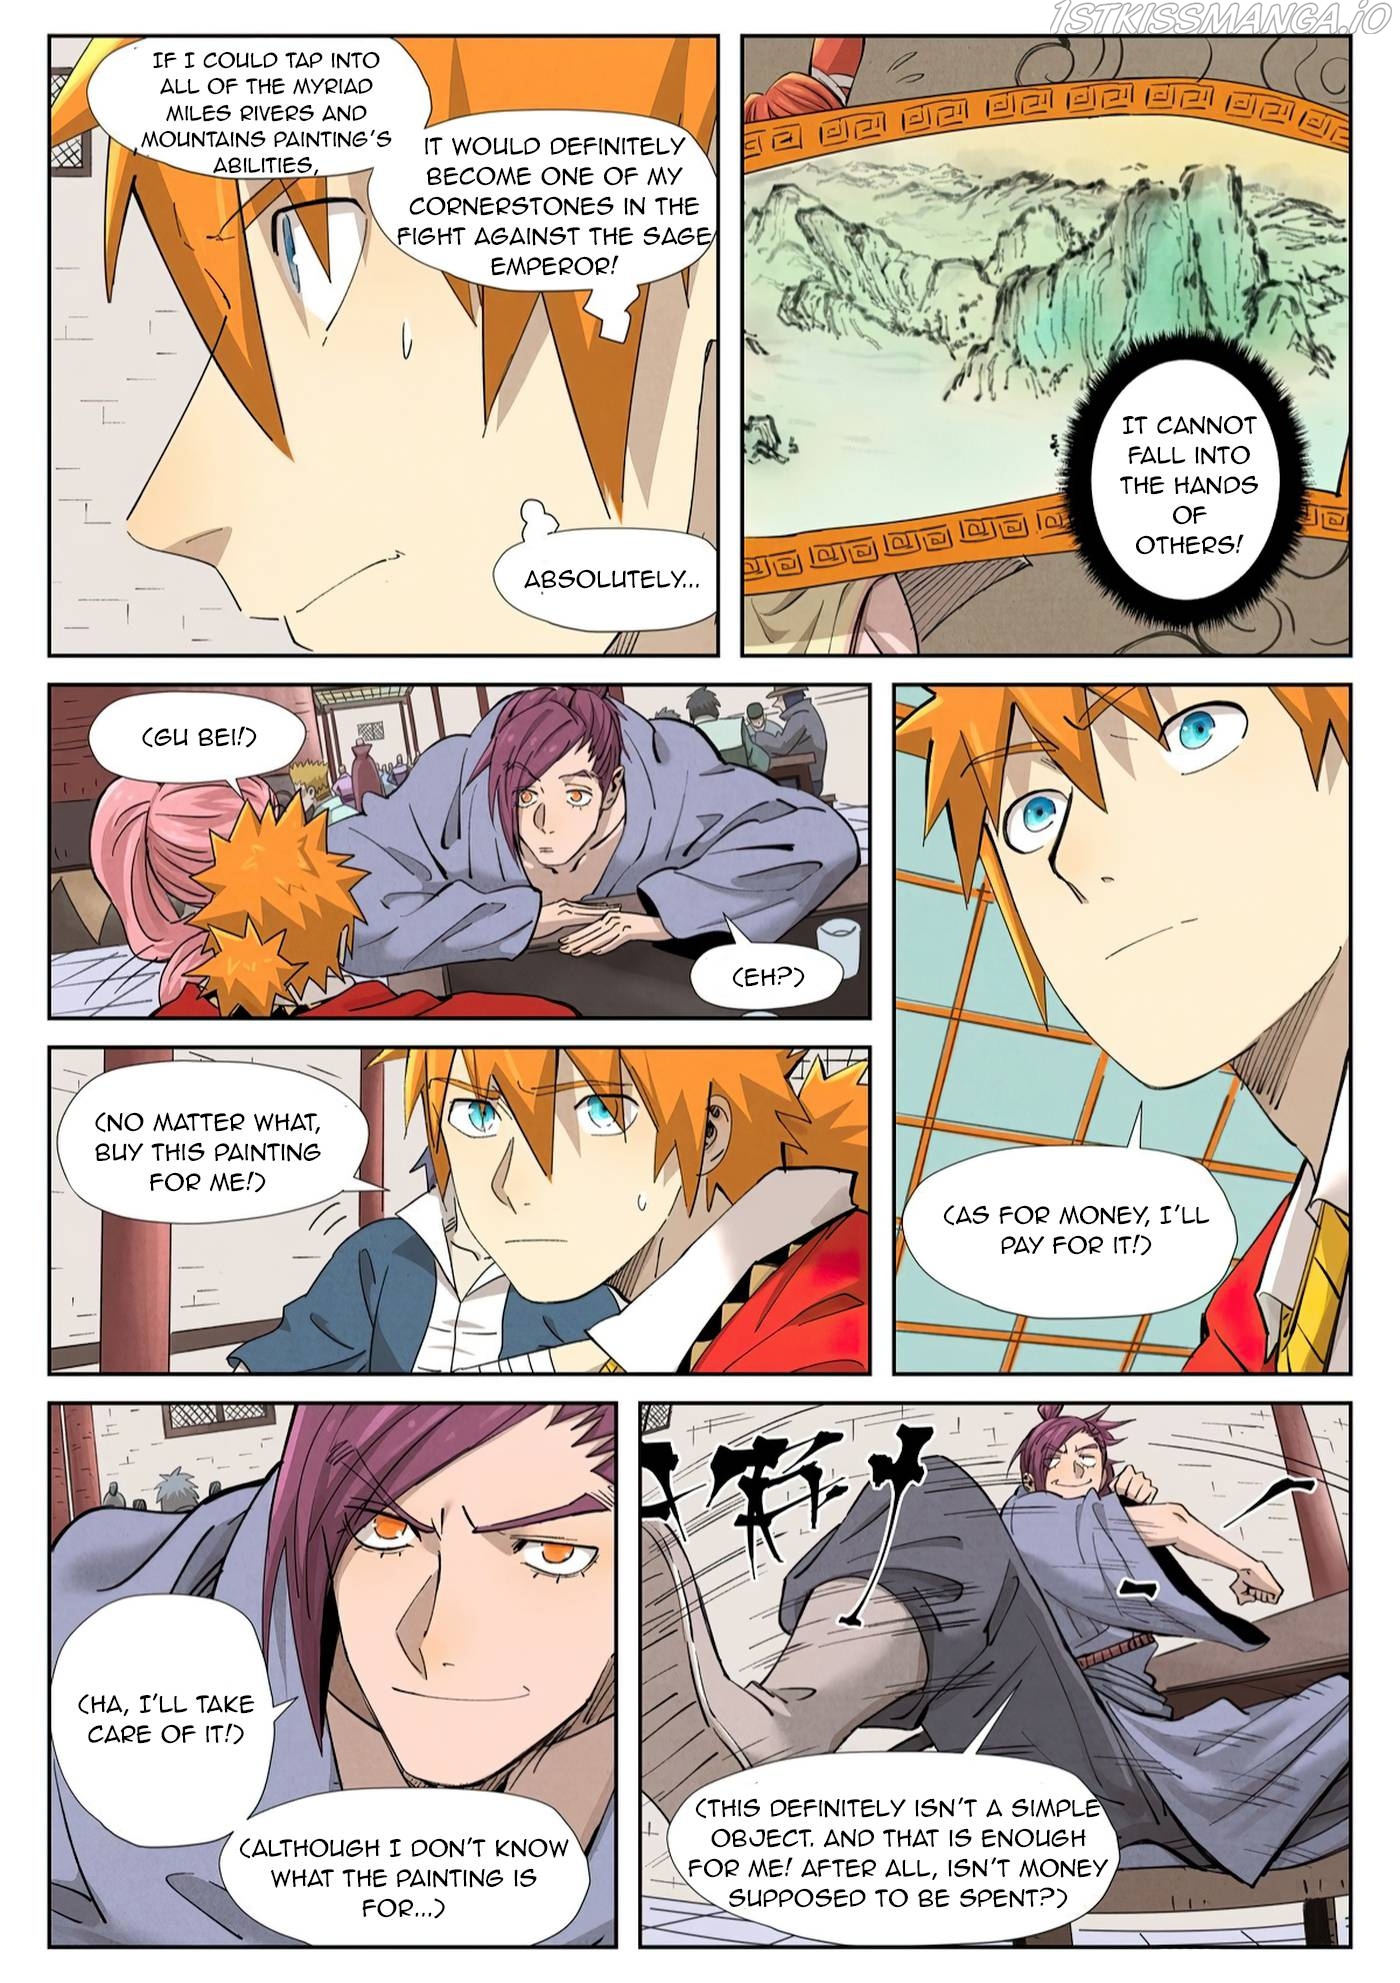 Tales of Demons and Gods Manhua Chapter 338.6 - Page 2